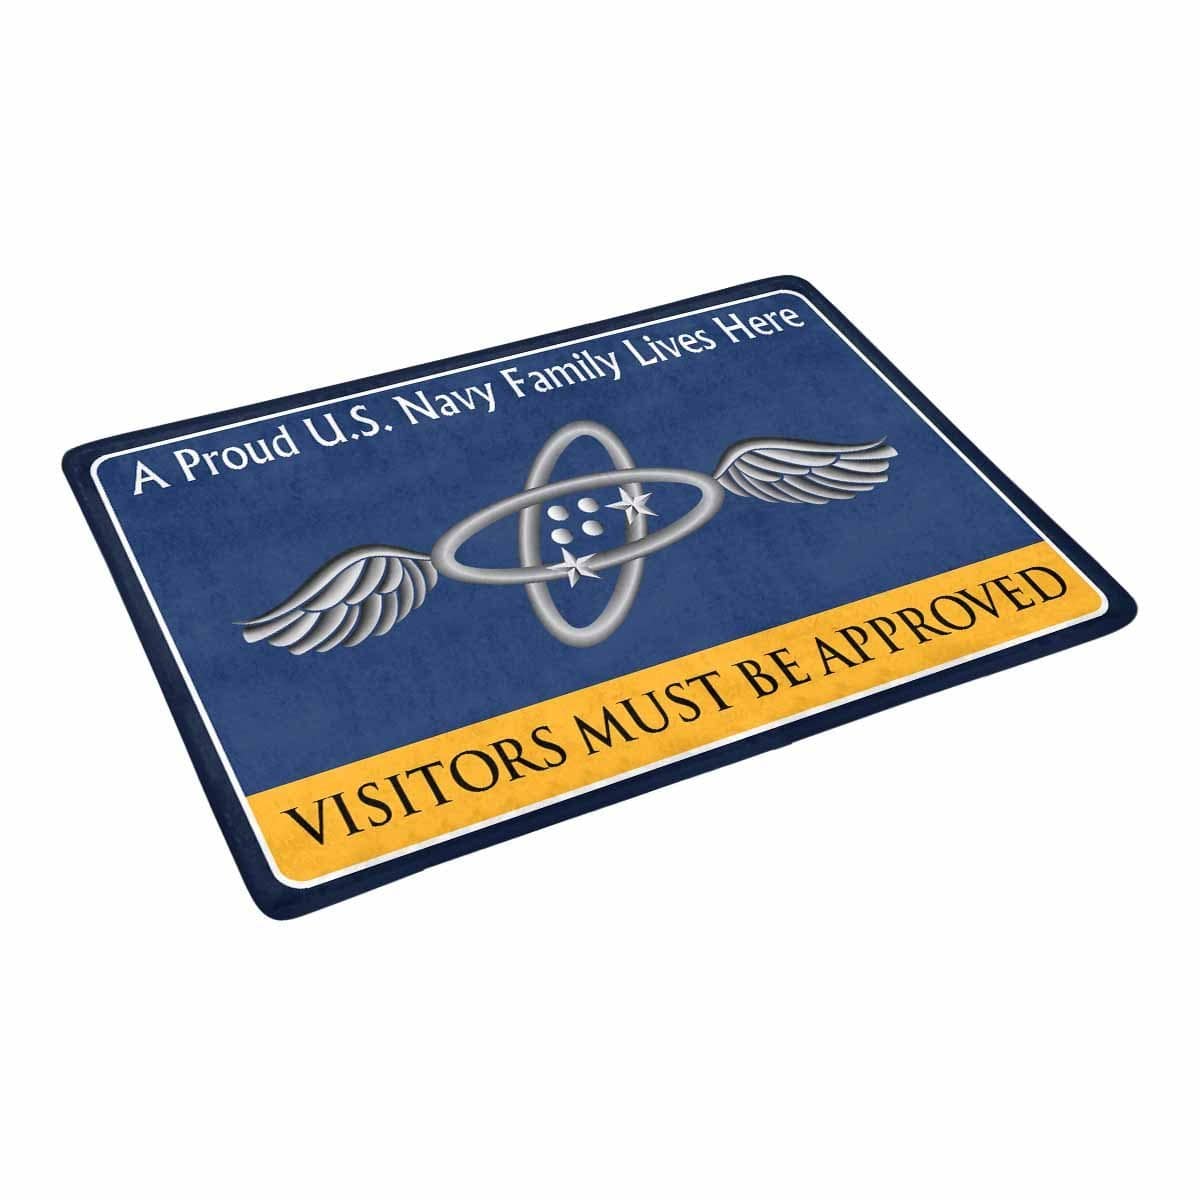 Navy Aviation Electronics Technician Navy AT Family Doormat - Visitors must be approved (23,6 inches x 15,7 inches)-Doormat-Navy-Rate-Veterans Nation